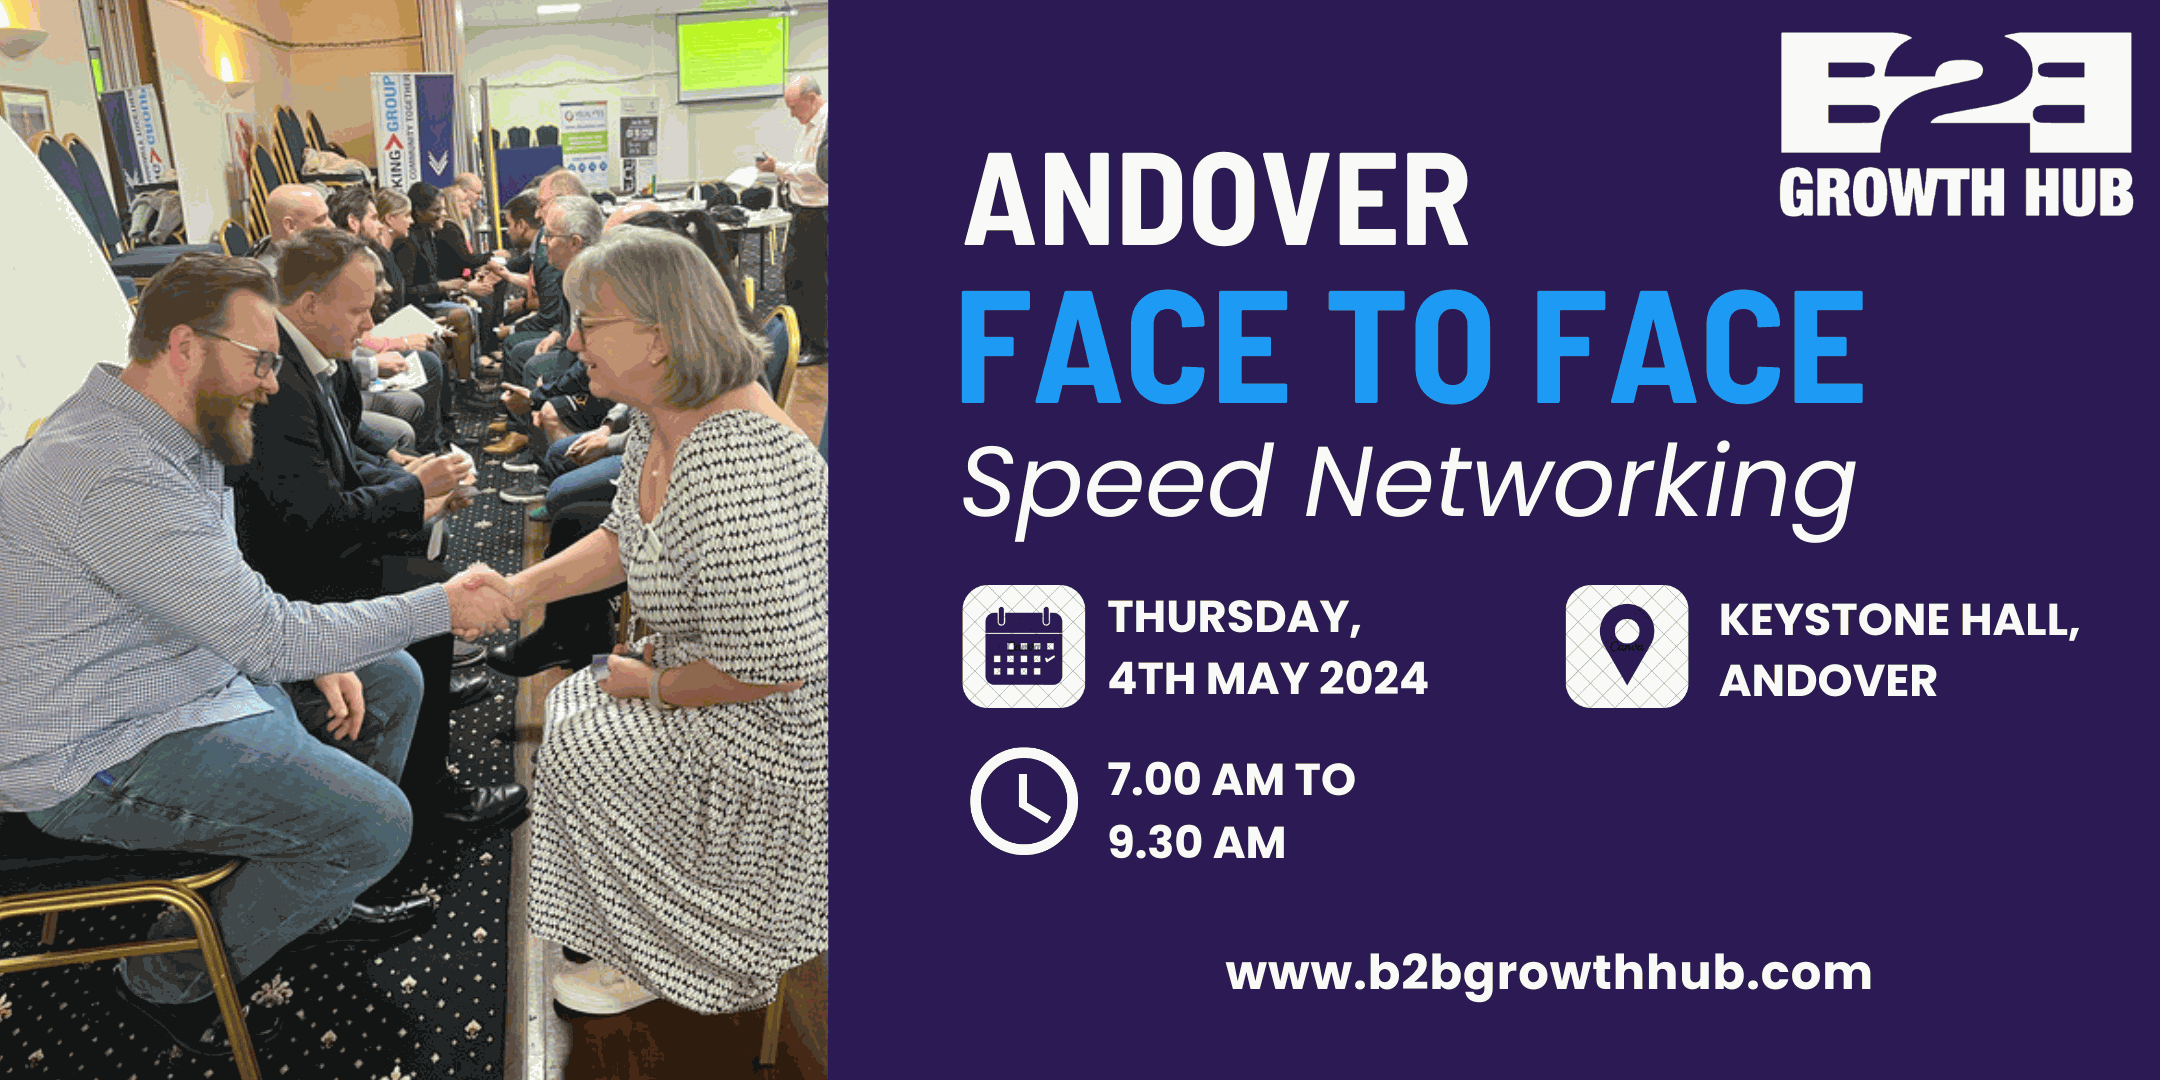 Andover Face 2 Face Morning Speed Networking - 02nd May 2024